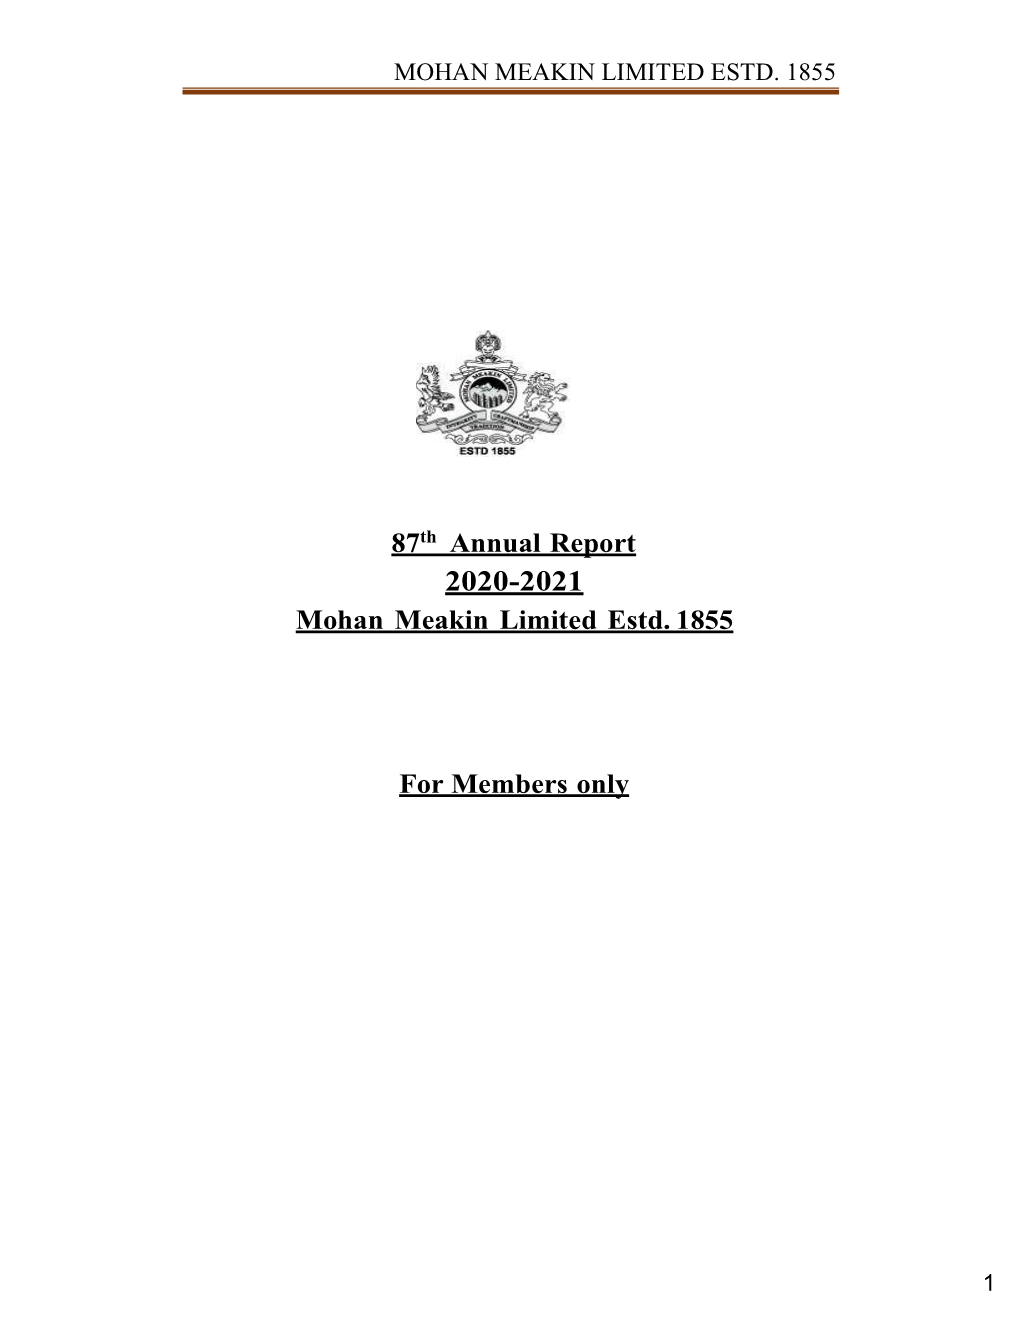 87Th Annual Report Mohan Meakin Limited Estd. 1855 for Members Only